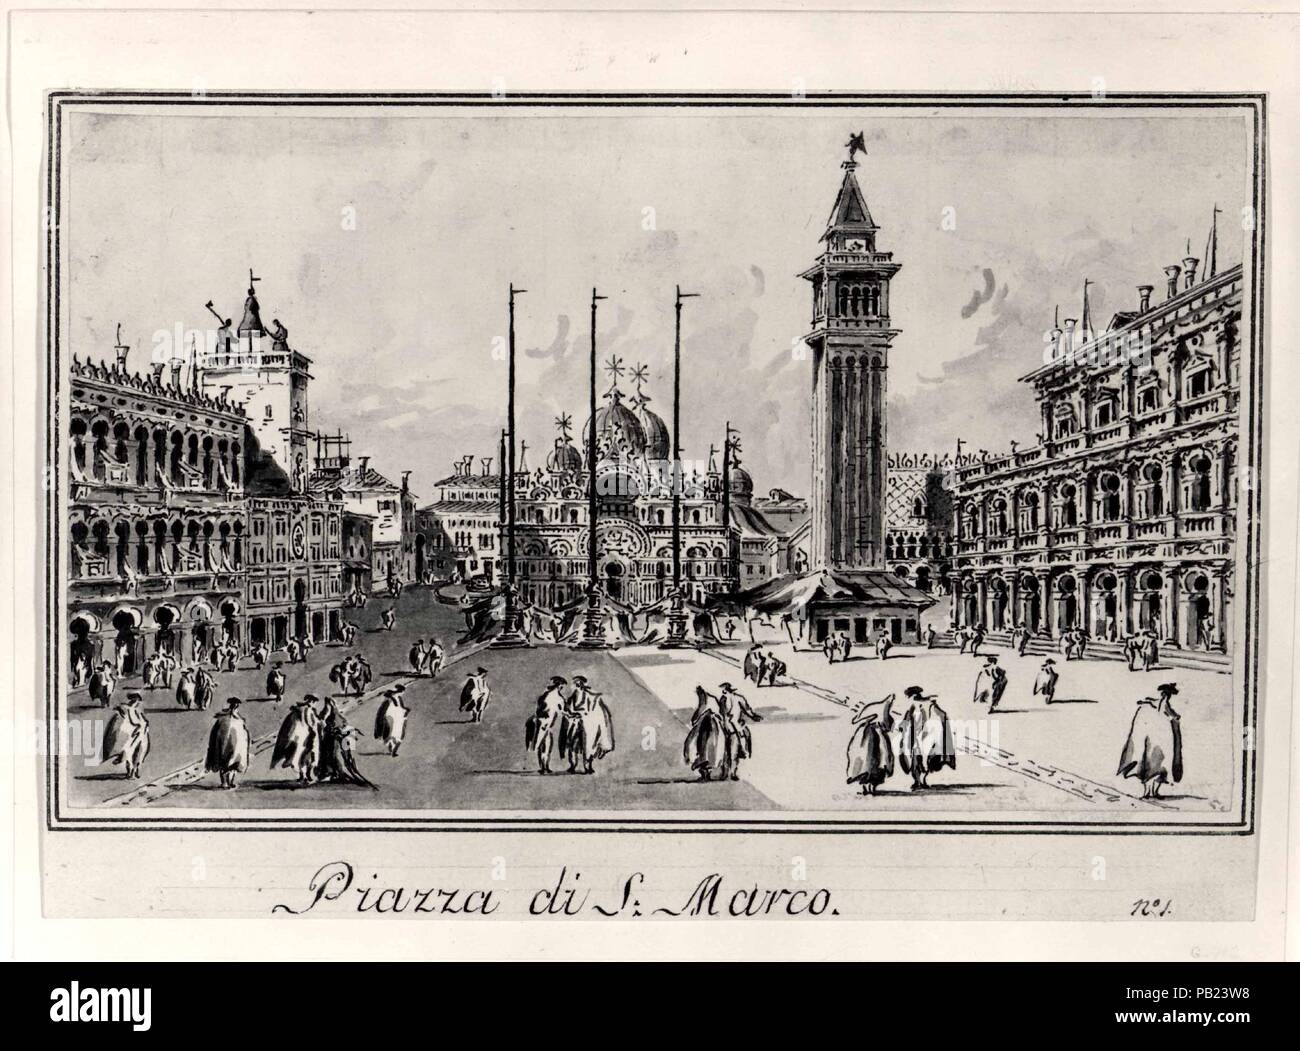 Piazza San Marco, Looking toward the Basilica. Artist: Giacomo Guardi (Italian, Venice (?) 1764-1835 Venice (?)). Dimensions: 4 15/16 x 8 3/8 in.  (12.5 x 21.2 cm). Date: ca. 1804-28.  This is one of a series of drawings, all in pen and ink, and gray wash, that formed part of an album housing forty-eight views of Venice and the surrounding islands.  Recognizing the market incentive to produce rather prosaic drawings as keepsakes for visiting tourists, Giacomo made numerous such albums, repeating the compositions as necessary. The view of the Piazza San Marco, which begins the numbered series,  Stock Photo